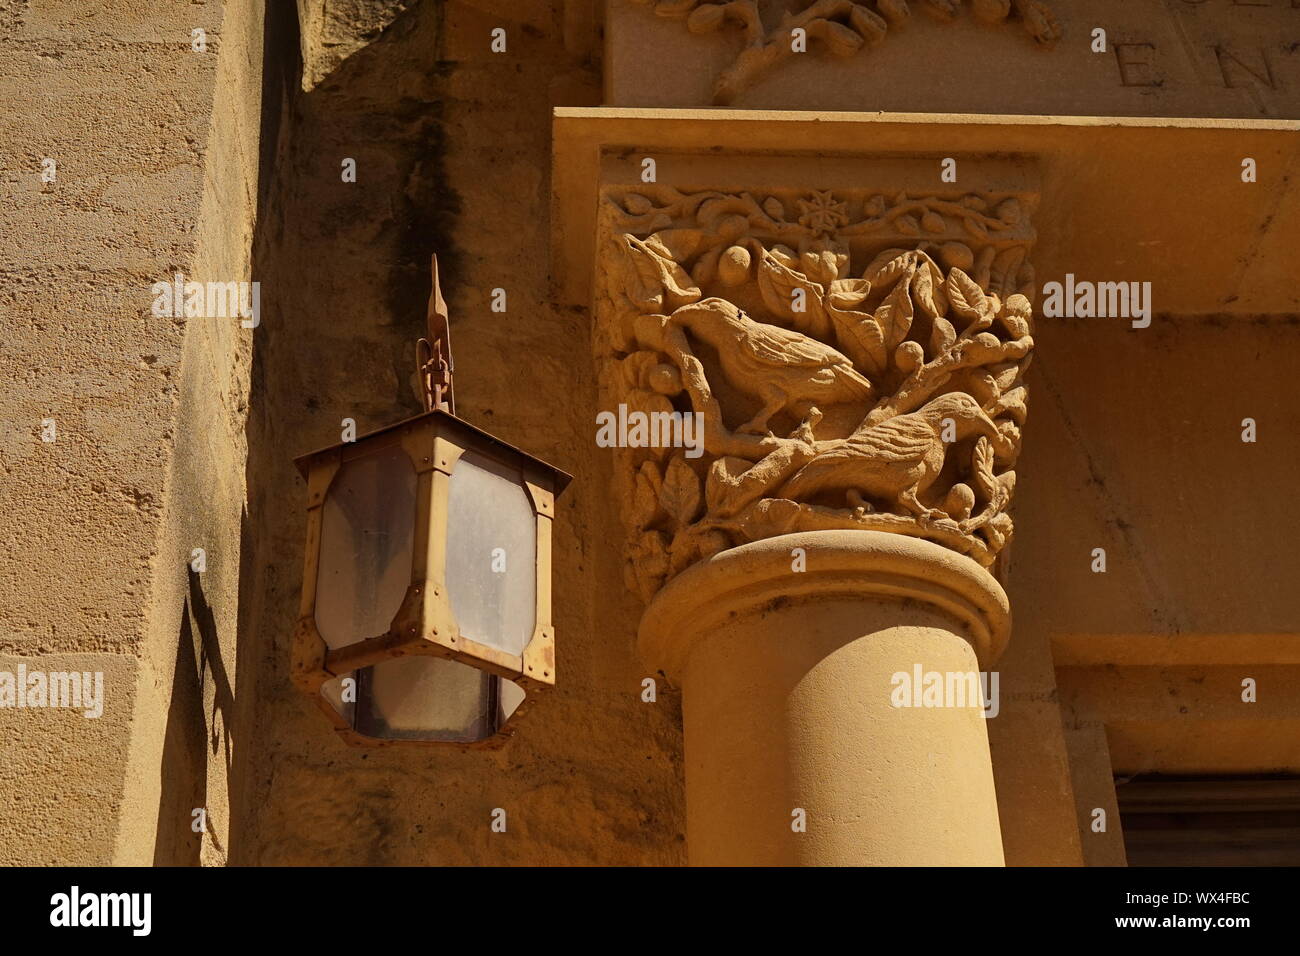 The top of an ornate stone pillar and an old lantern light hanging Stock Photo